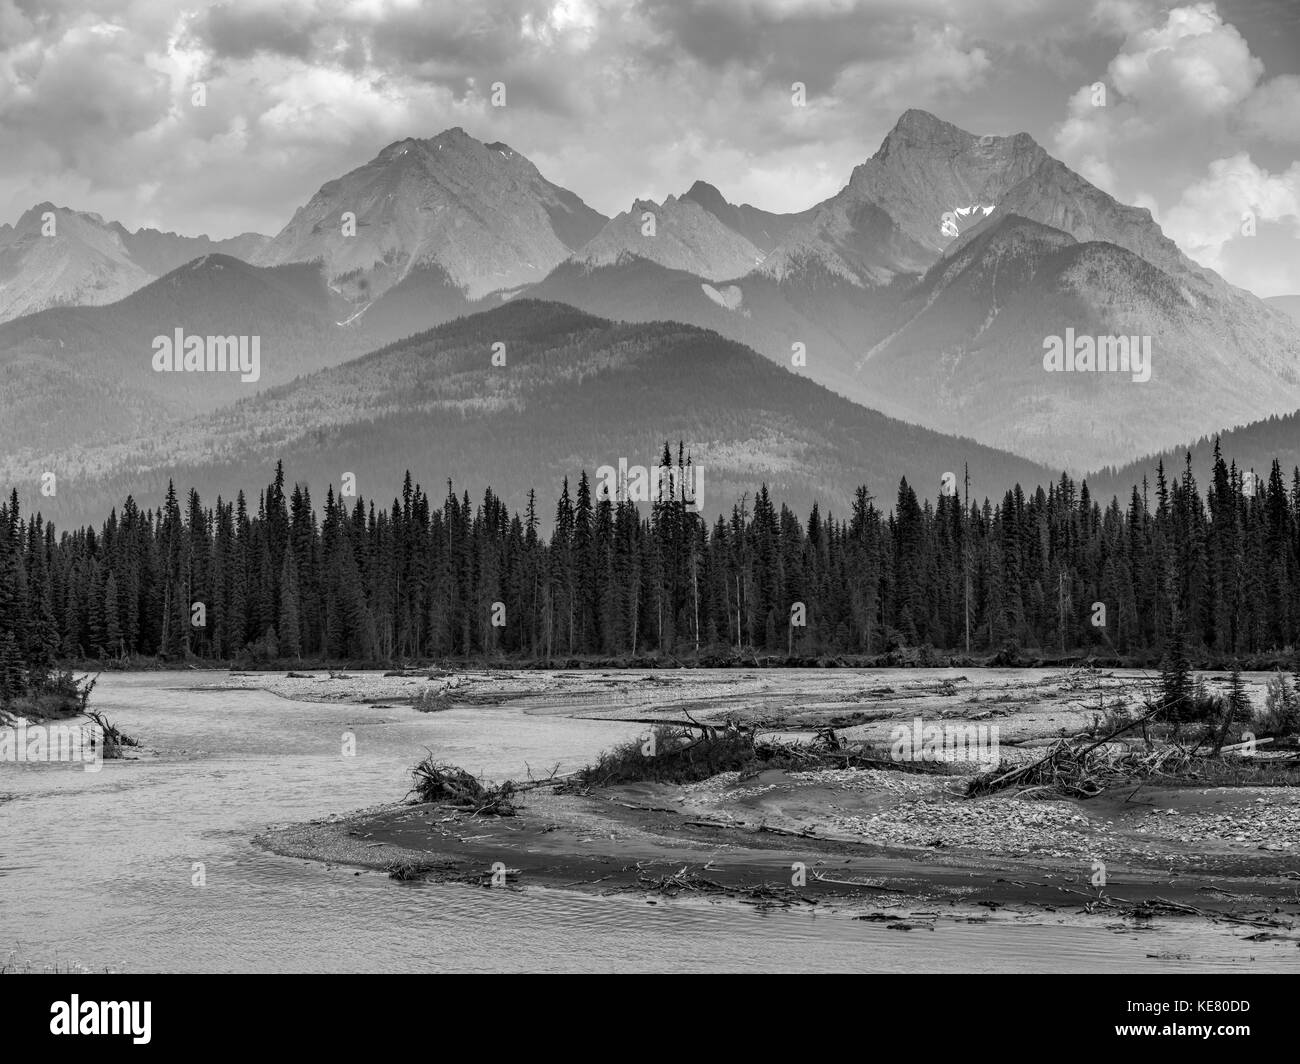 Black and white landscape of the rugged Canadian rocky mountains with a forest and a flowing river in the foreground Stock Photo